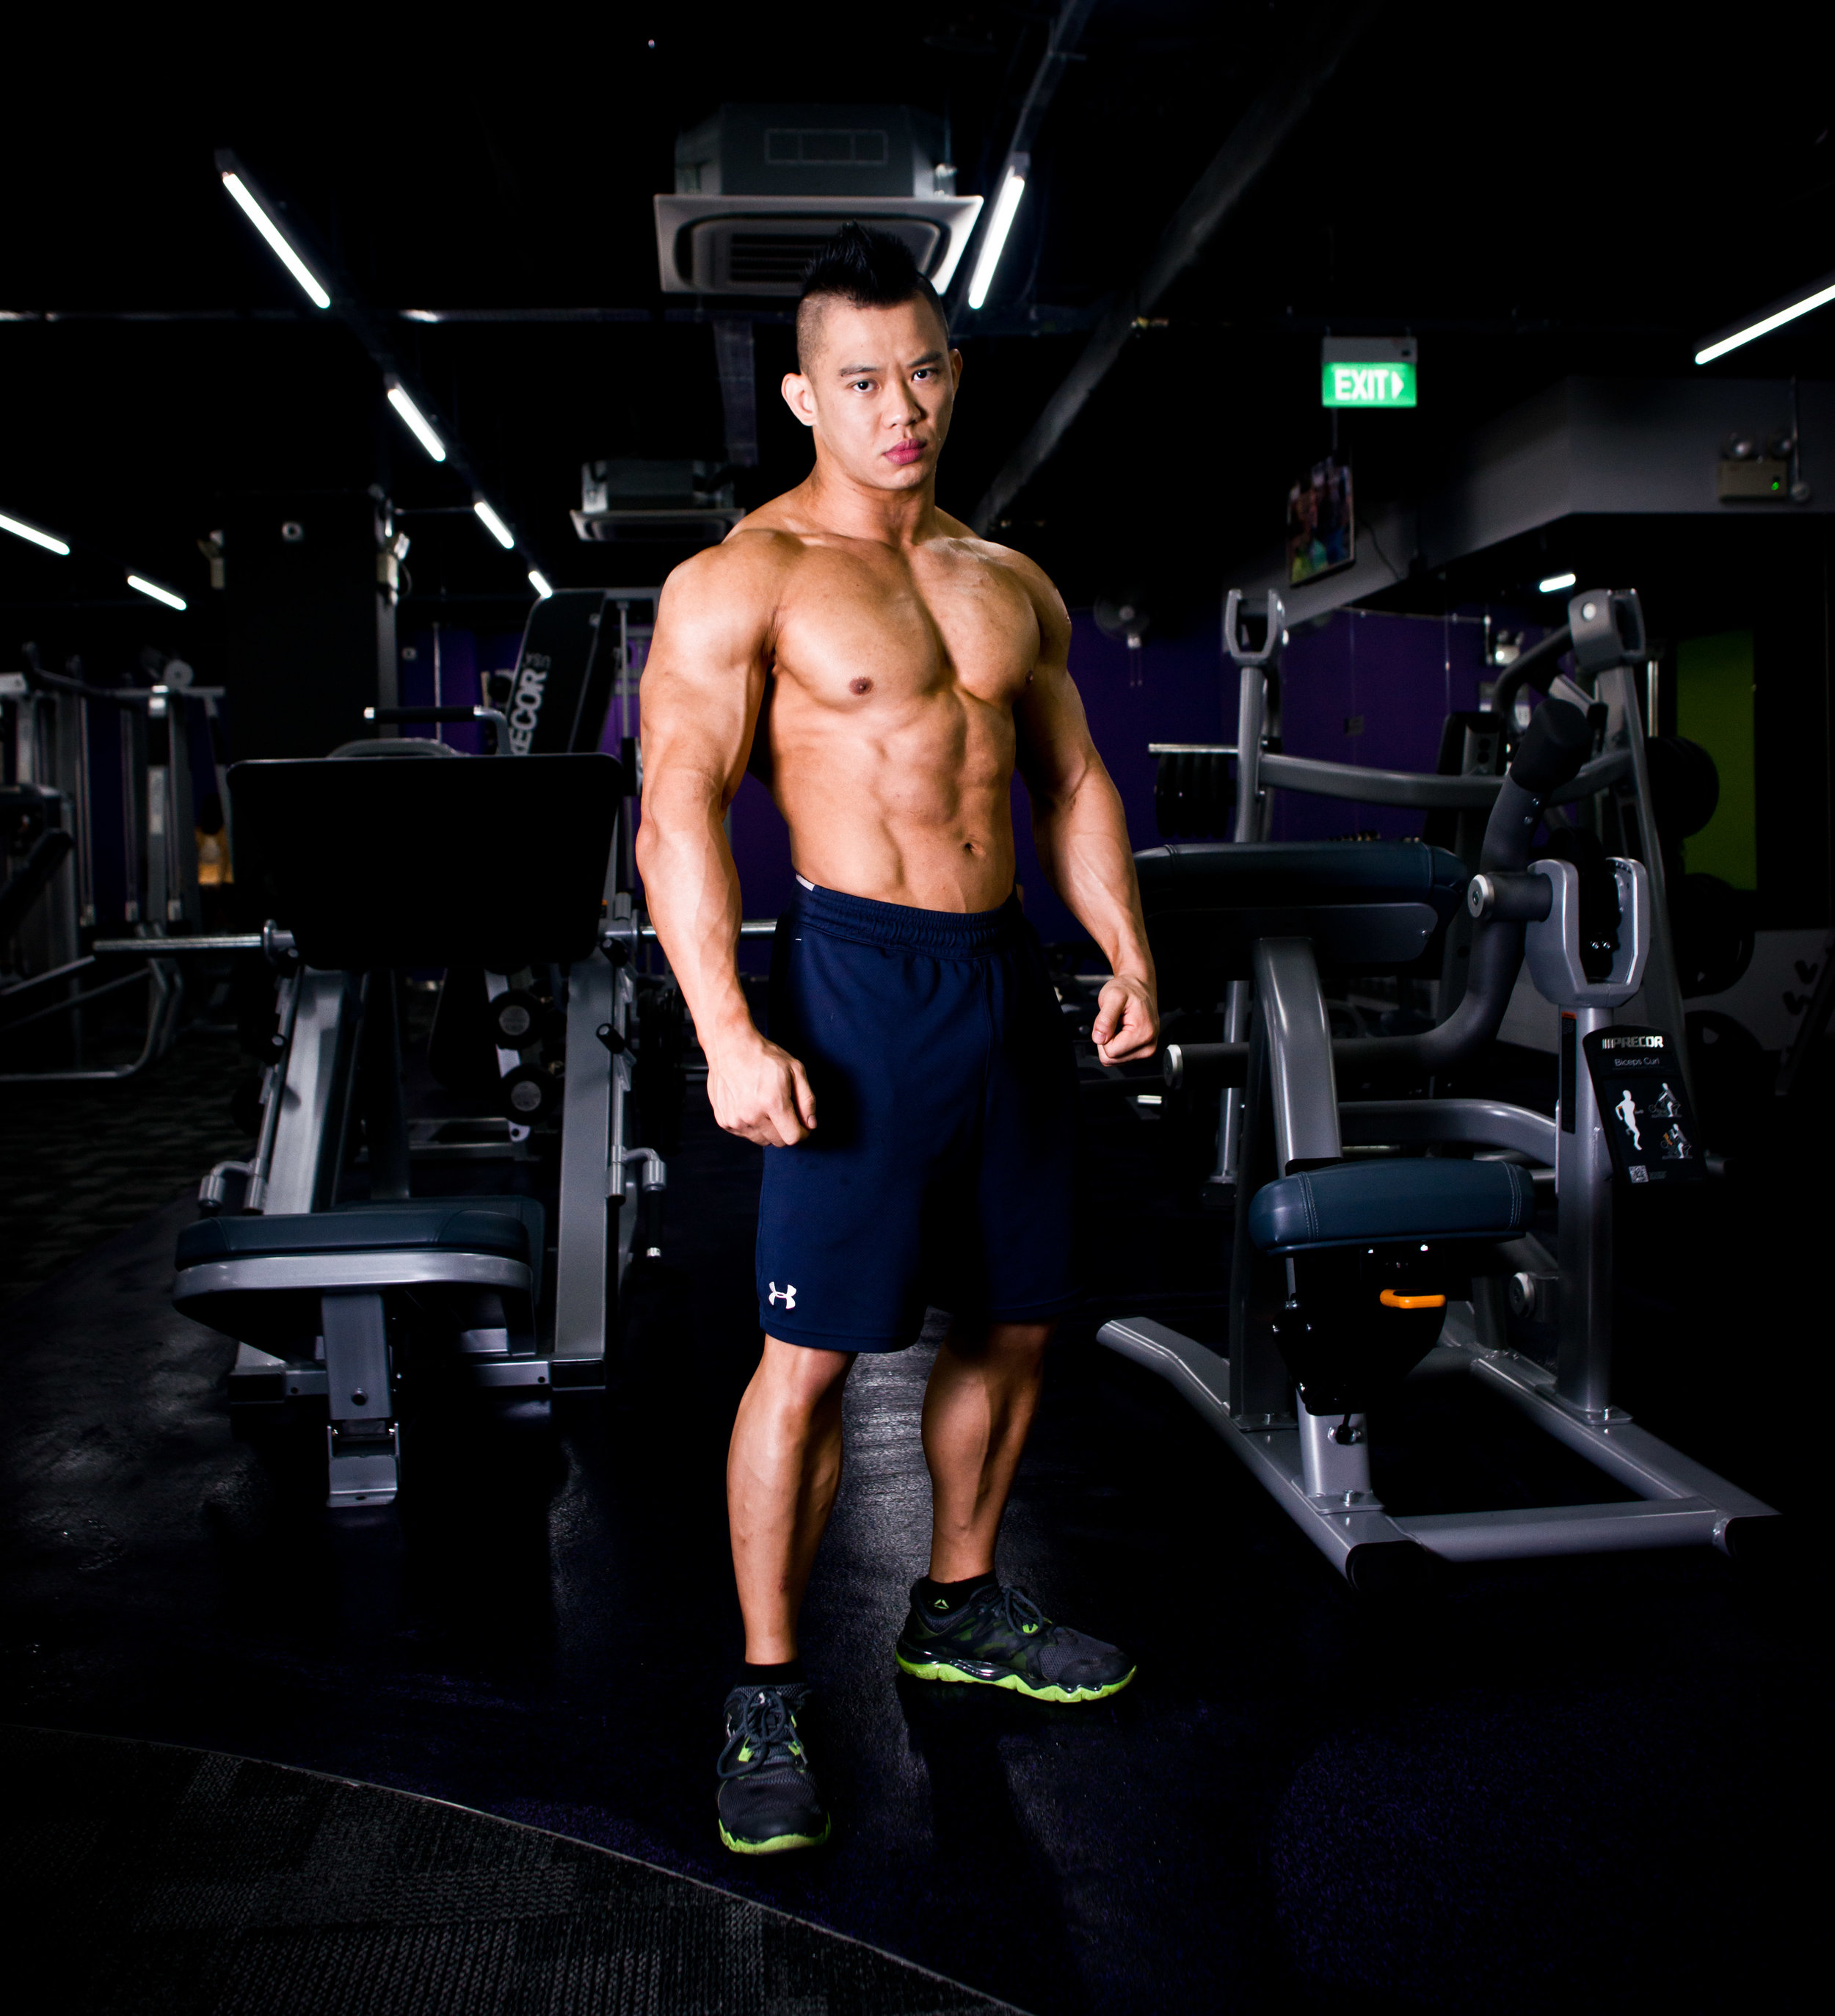 A Malaysian Body Builder in the Gym.